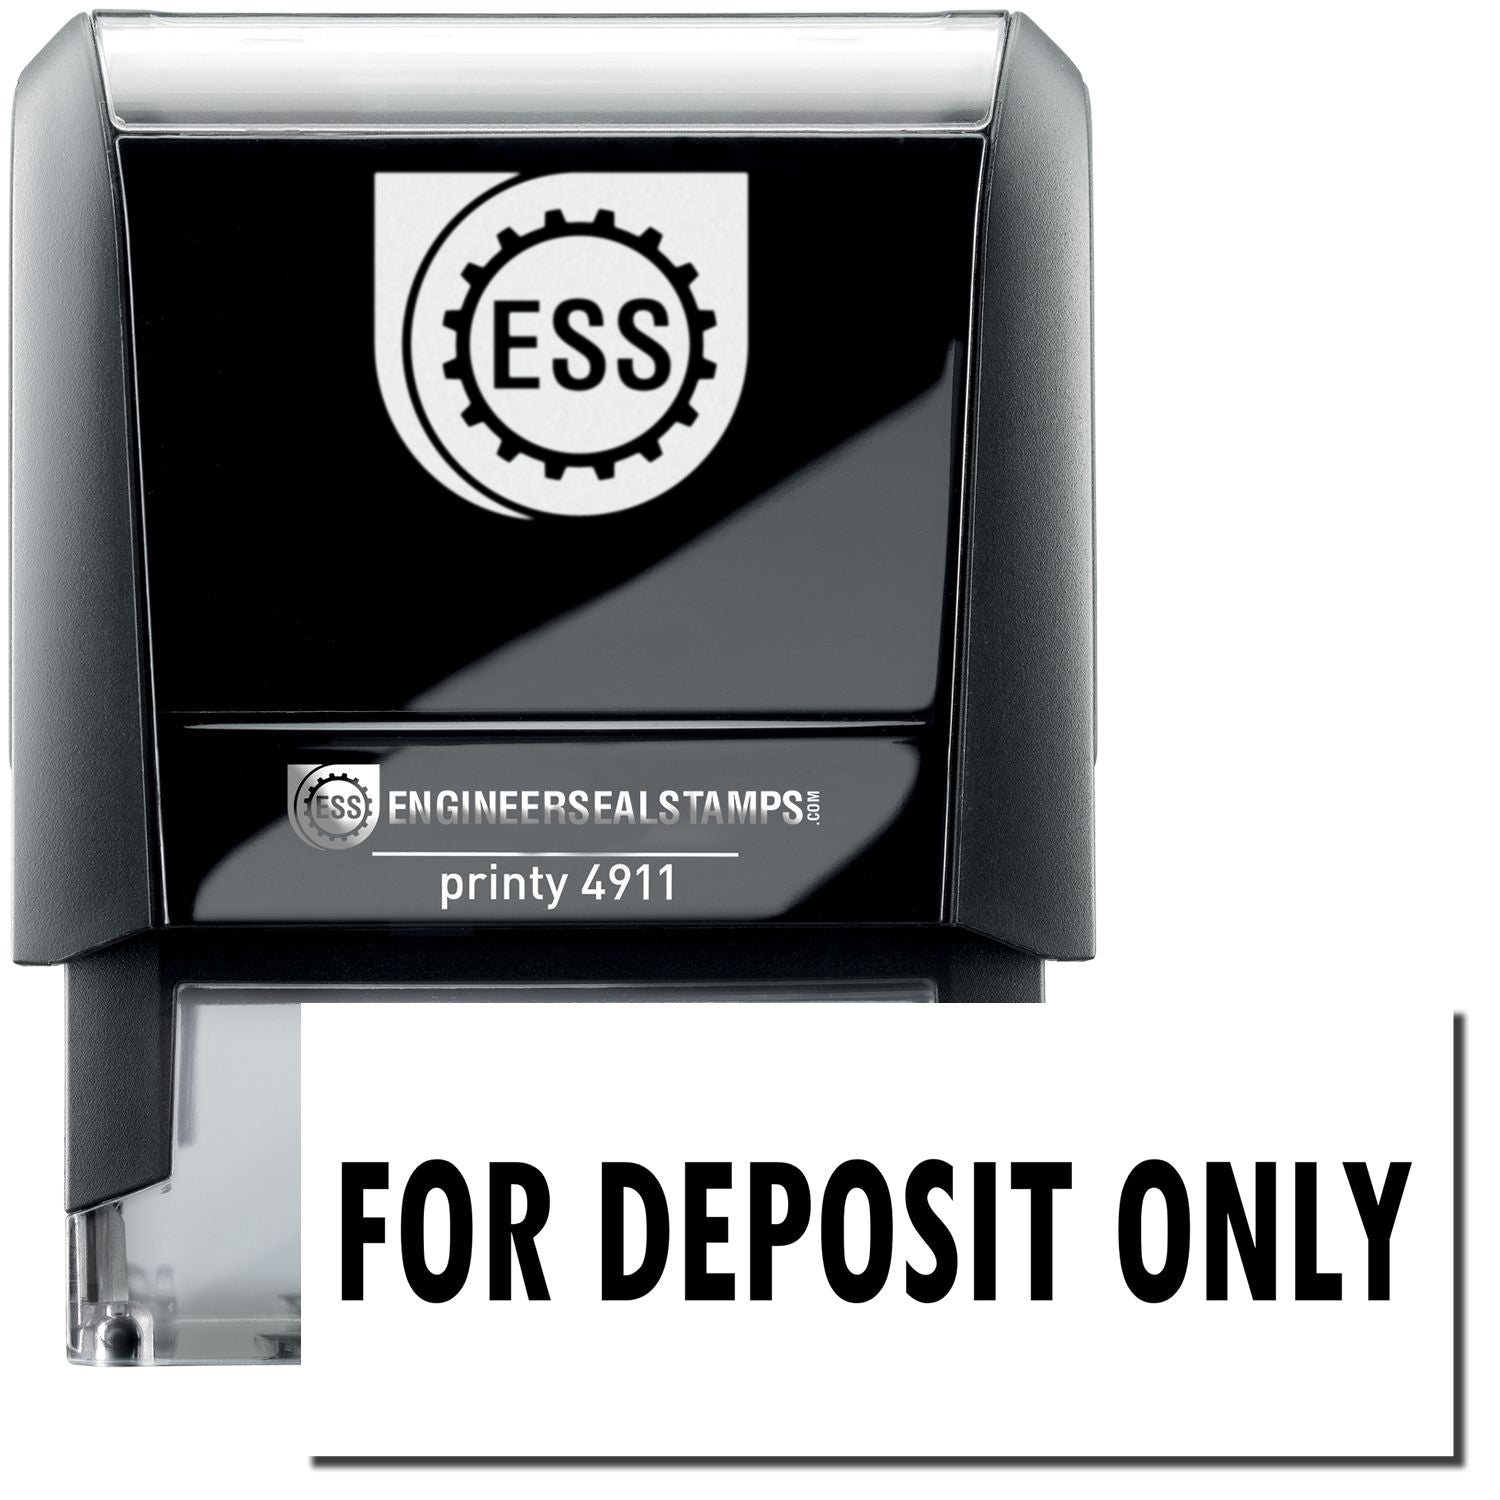 A self-inking stamp with a stamped image showing how the text "FOR DEPOSIT ONLY" is displayed after stamping.